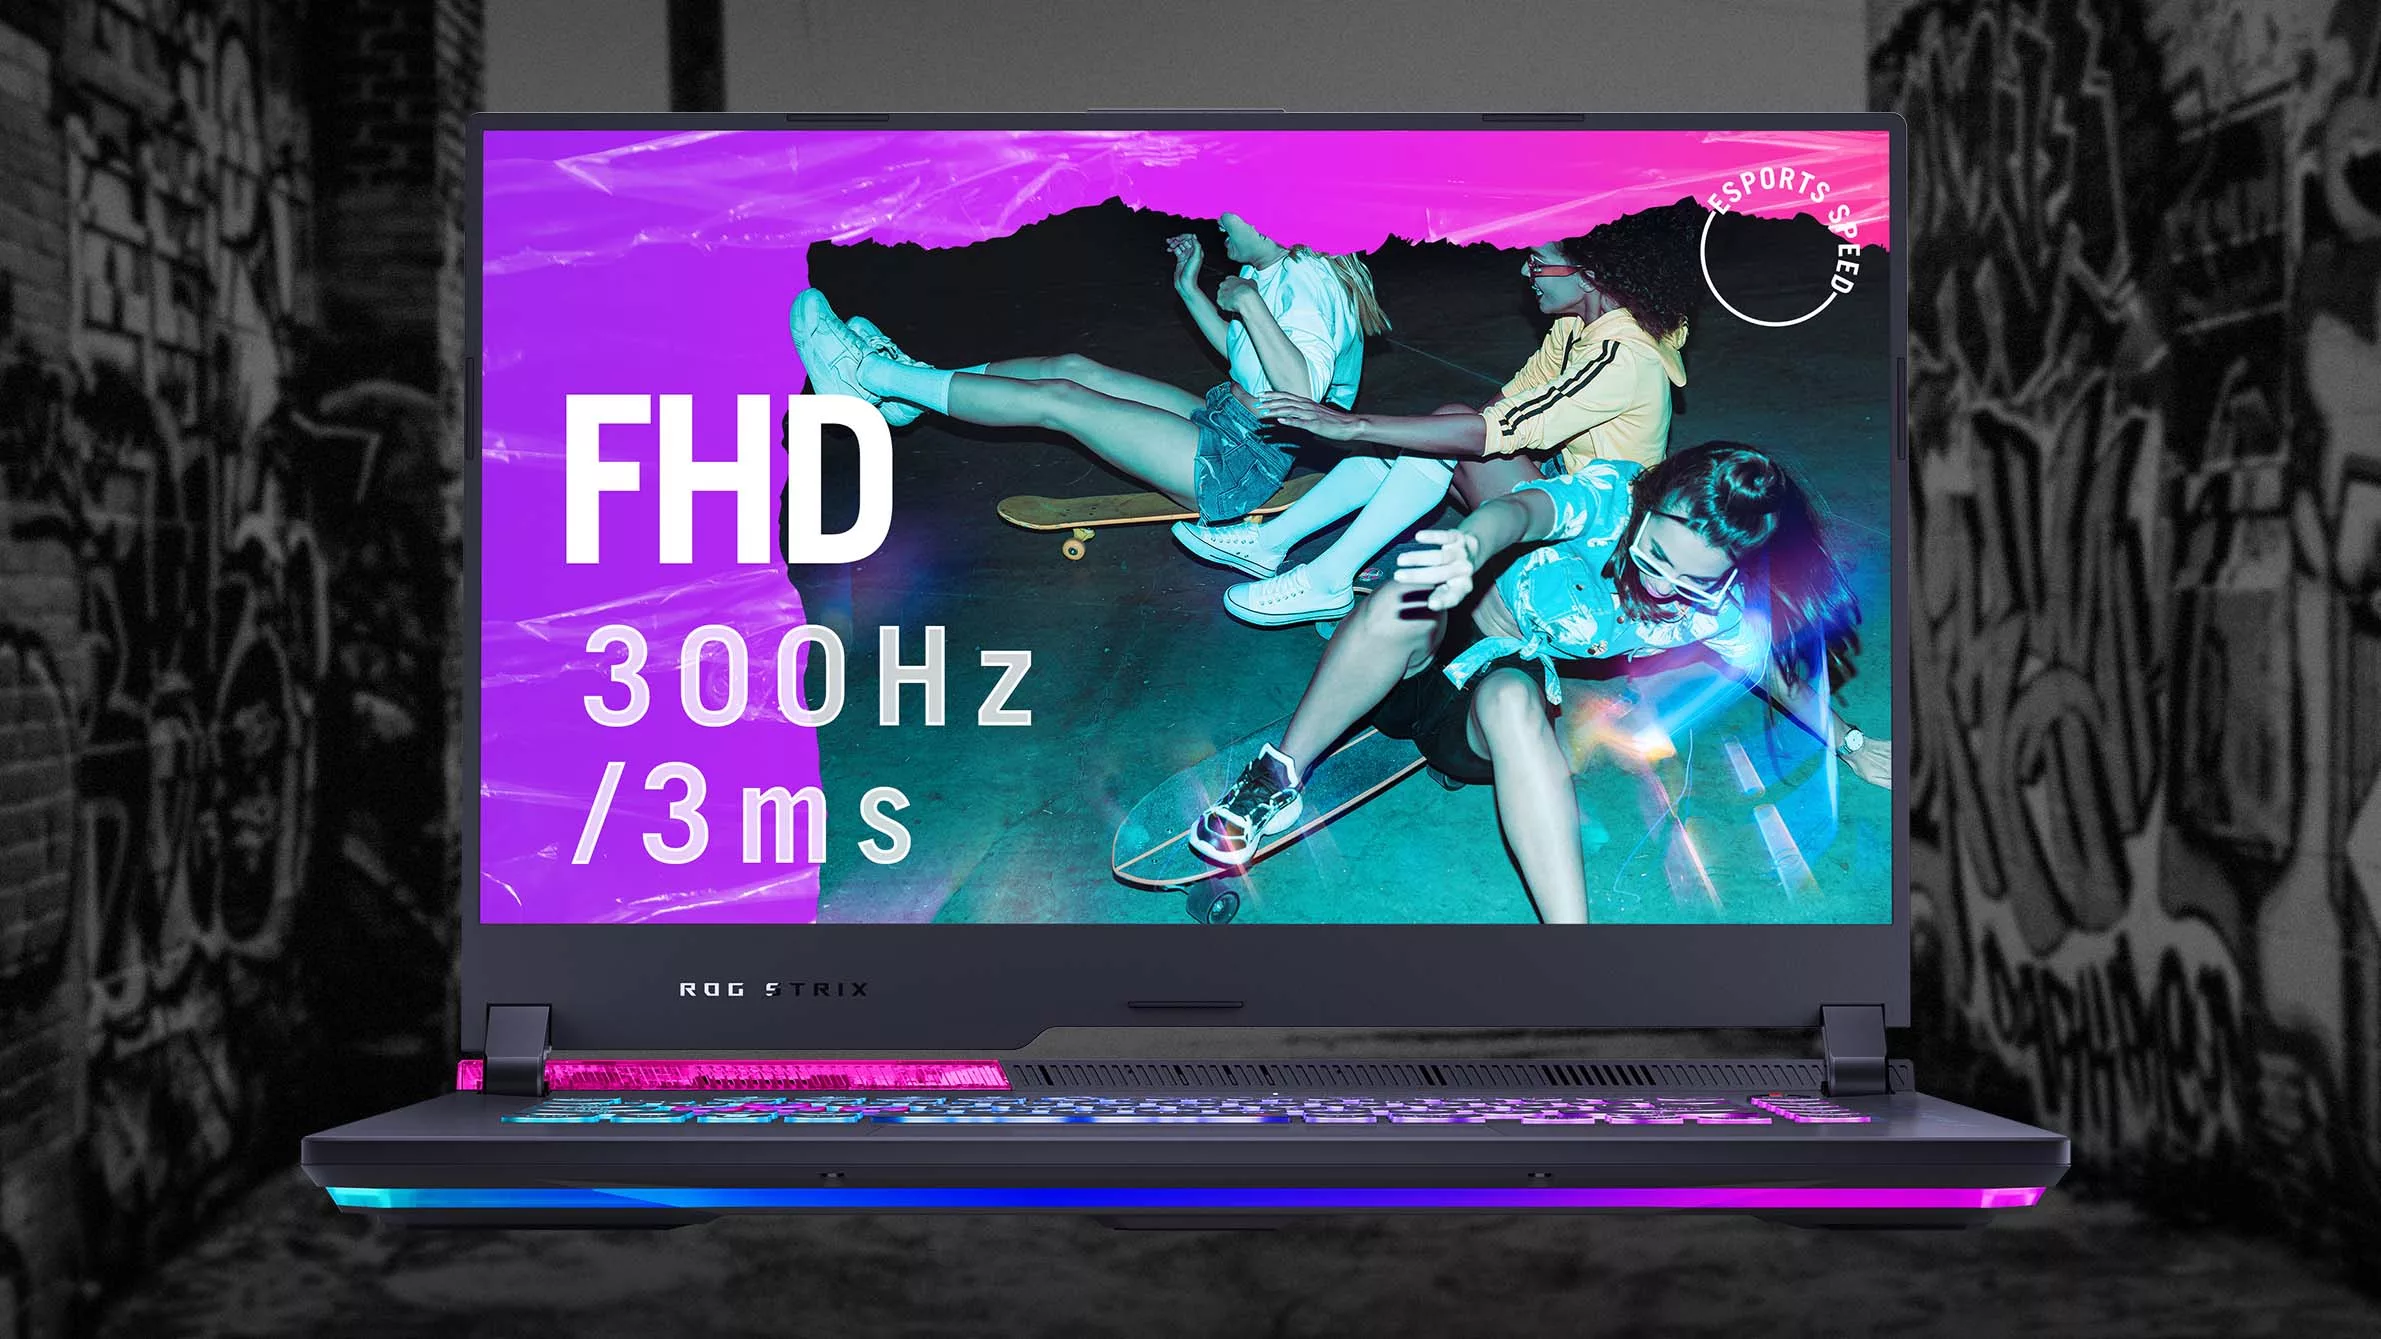 ROG Strix SCAR featured, with a FHD 300Hz refresh rate superimposed on the screen.